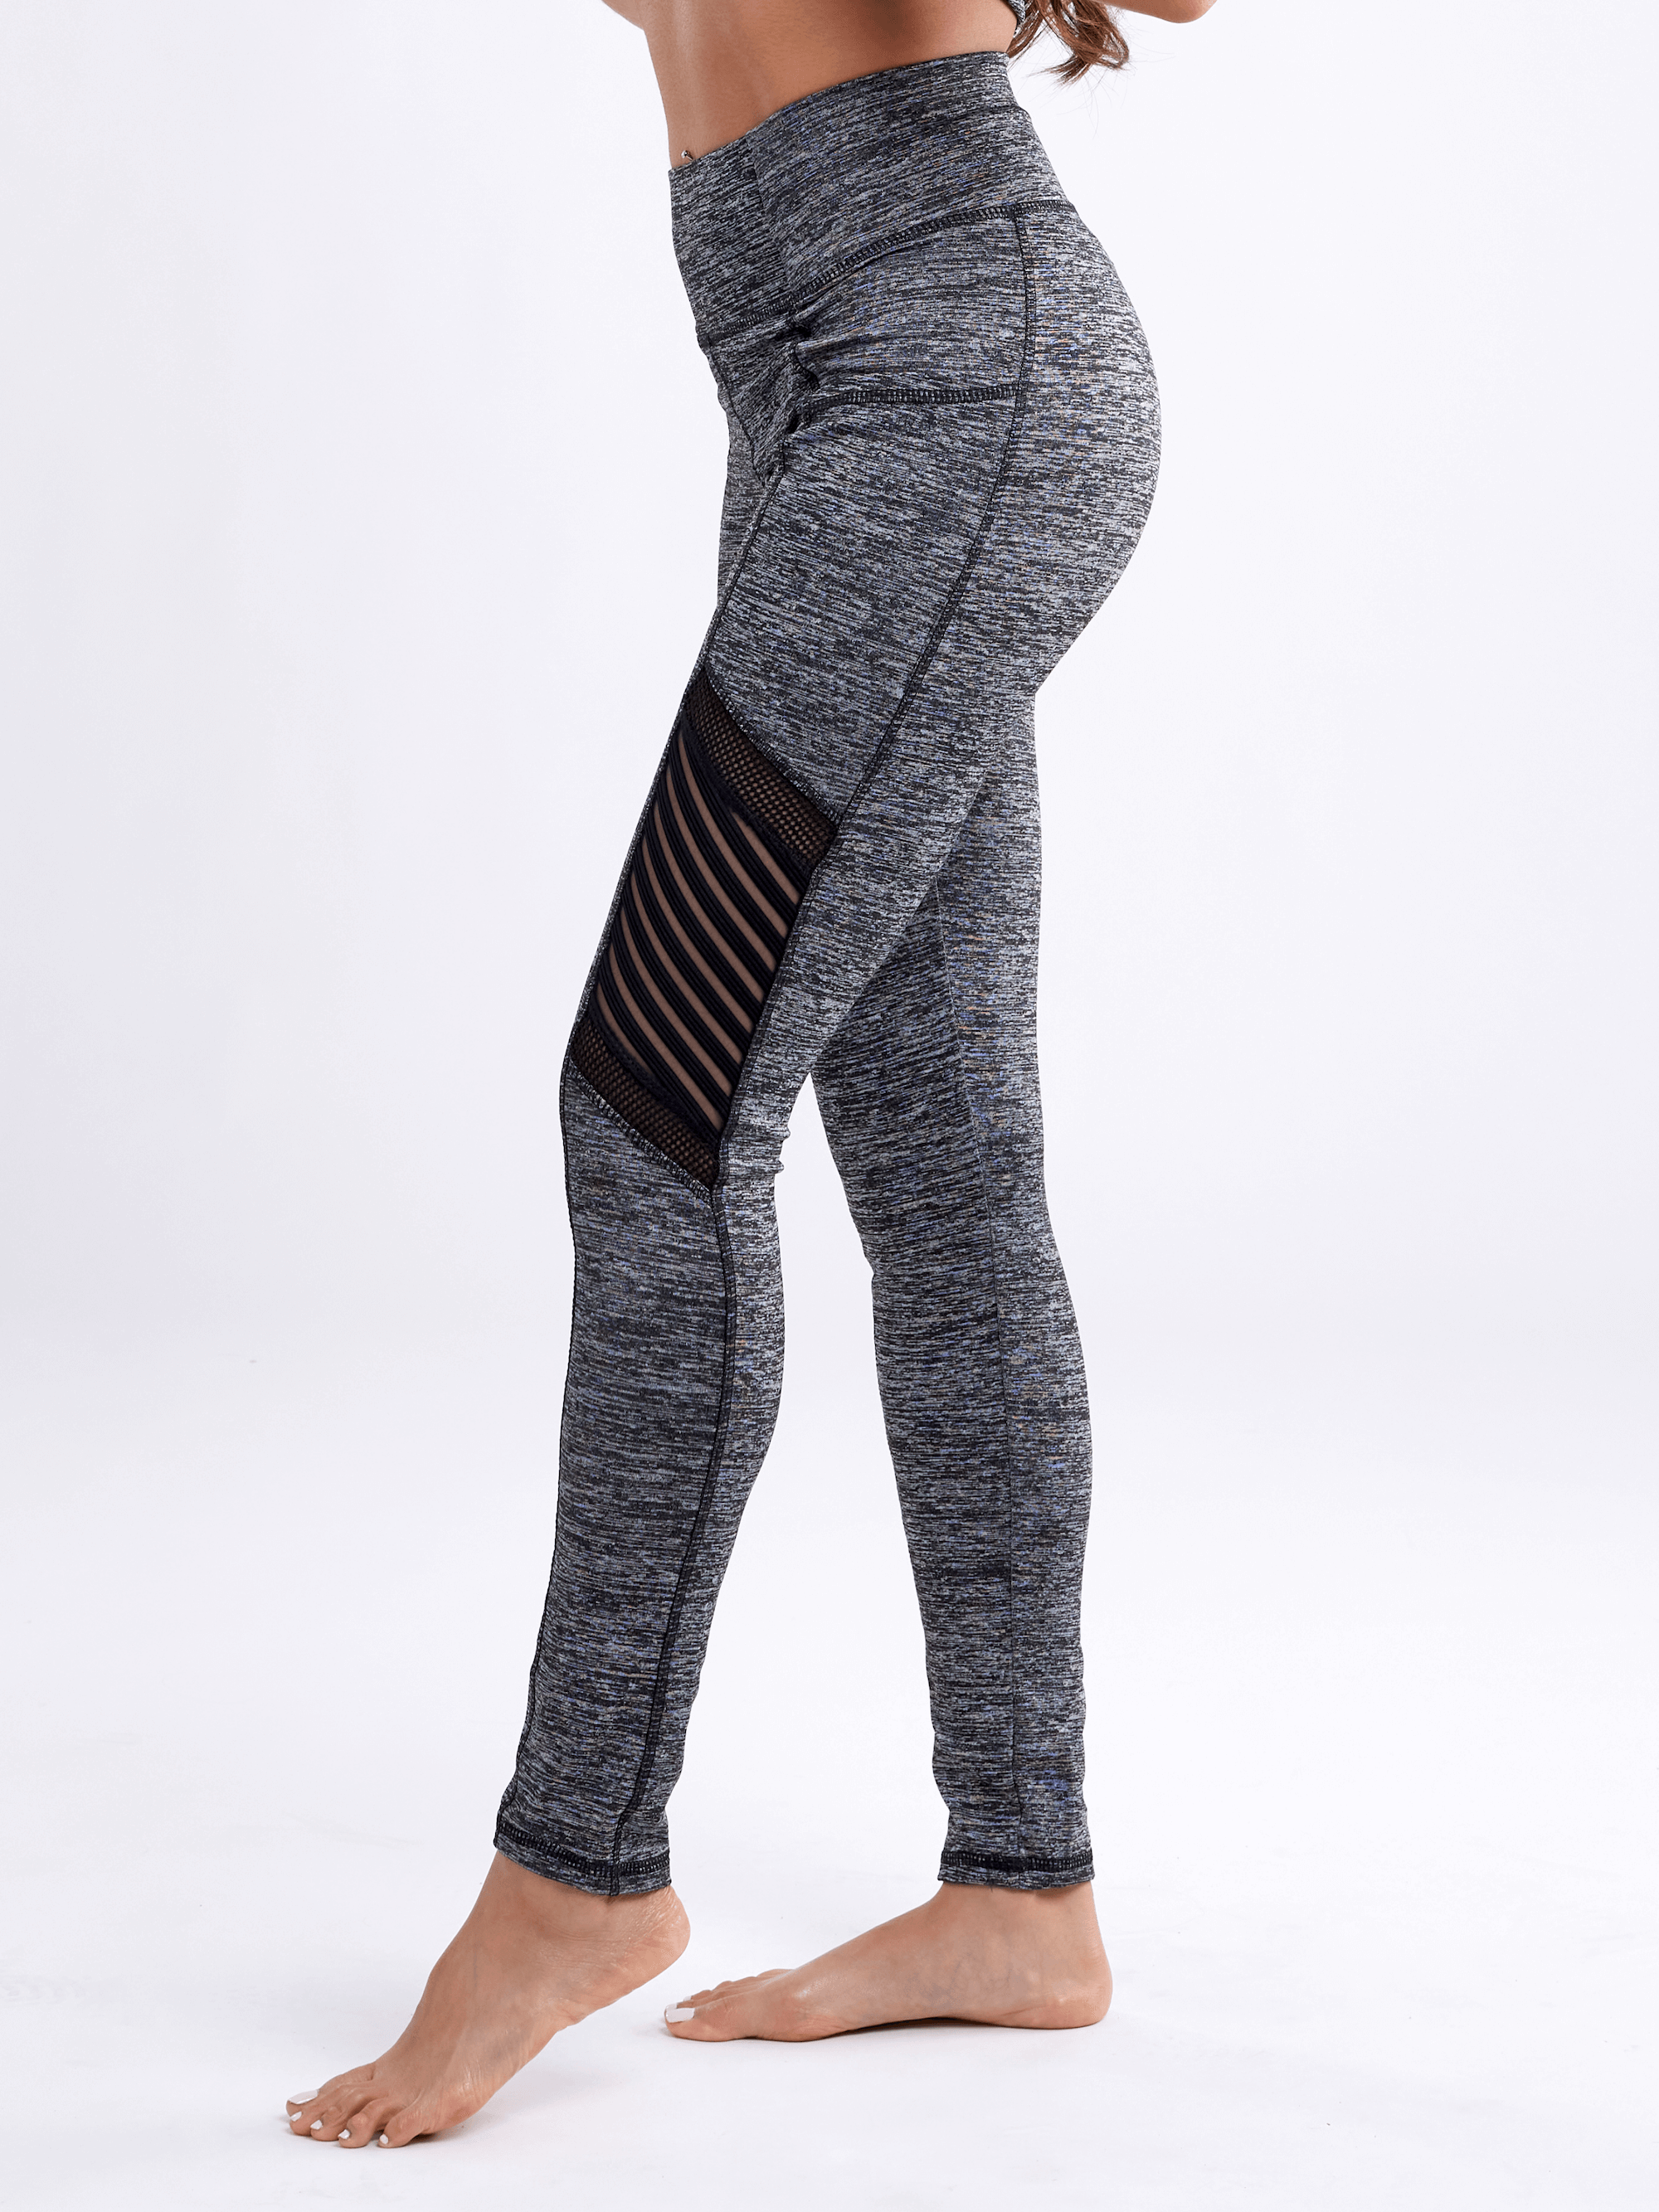  High Waisted Workout Leggings with Pockets for Women